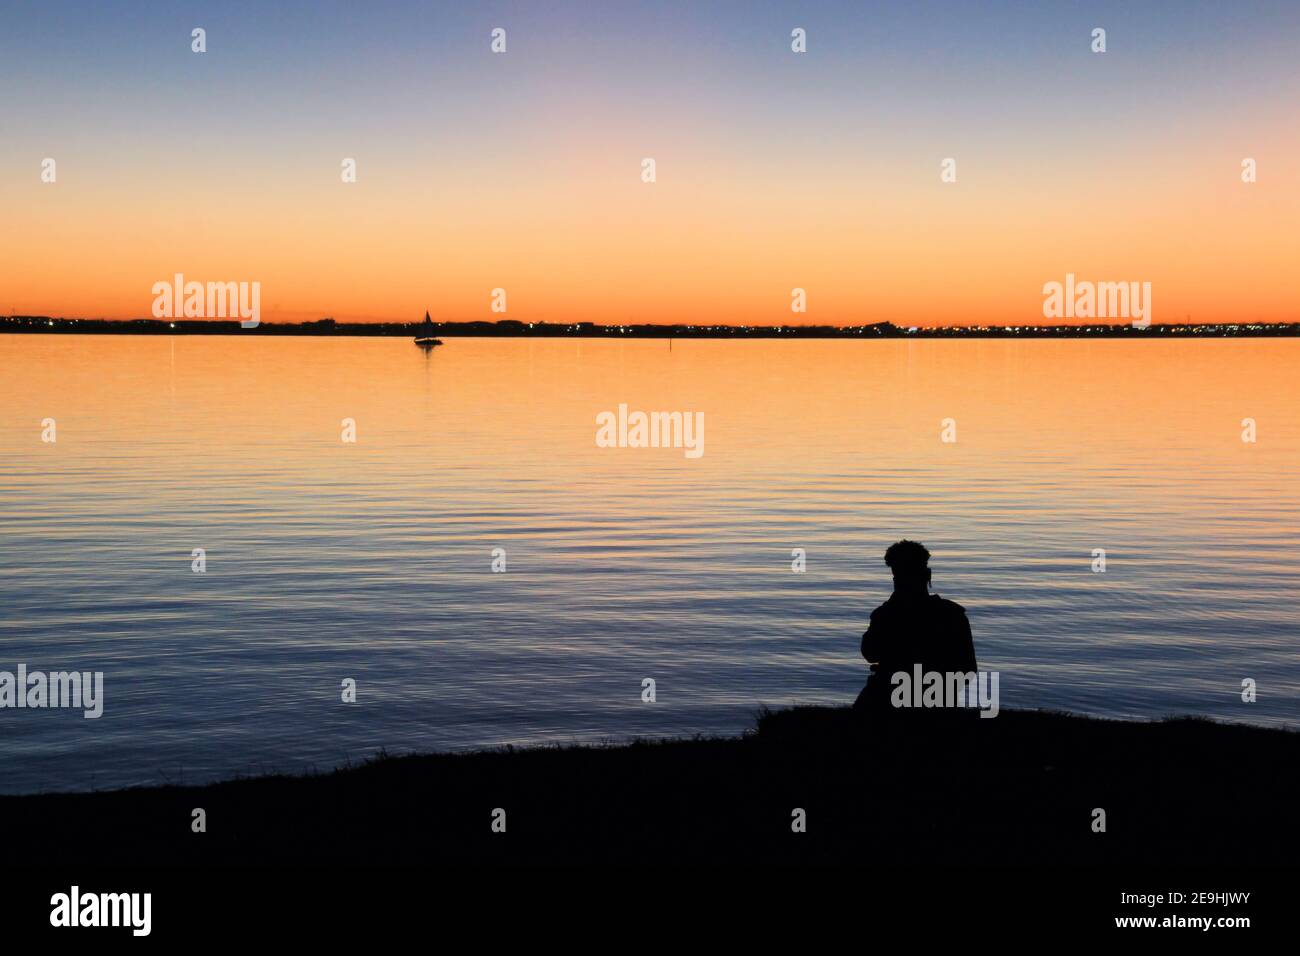 A boy is silhouetted against a beautiful sunset over Lake Hefner in Oklahoma City. Stock Photo